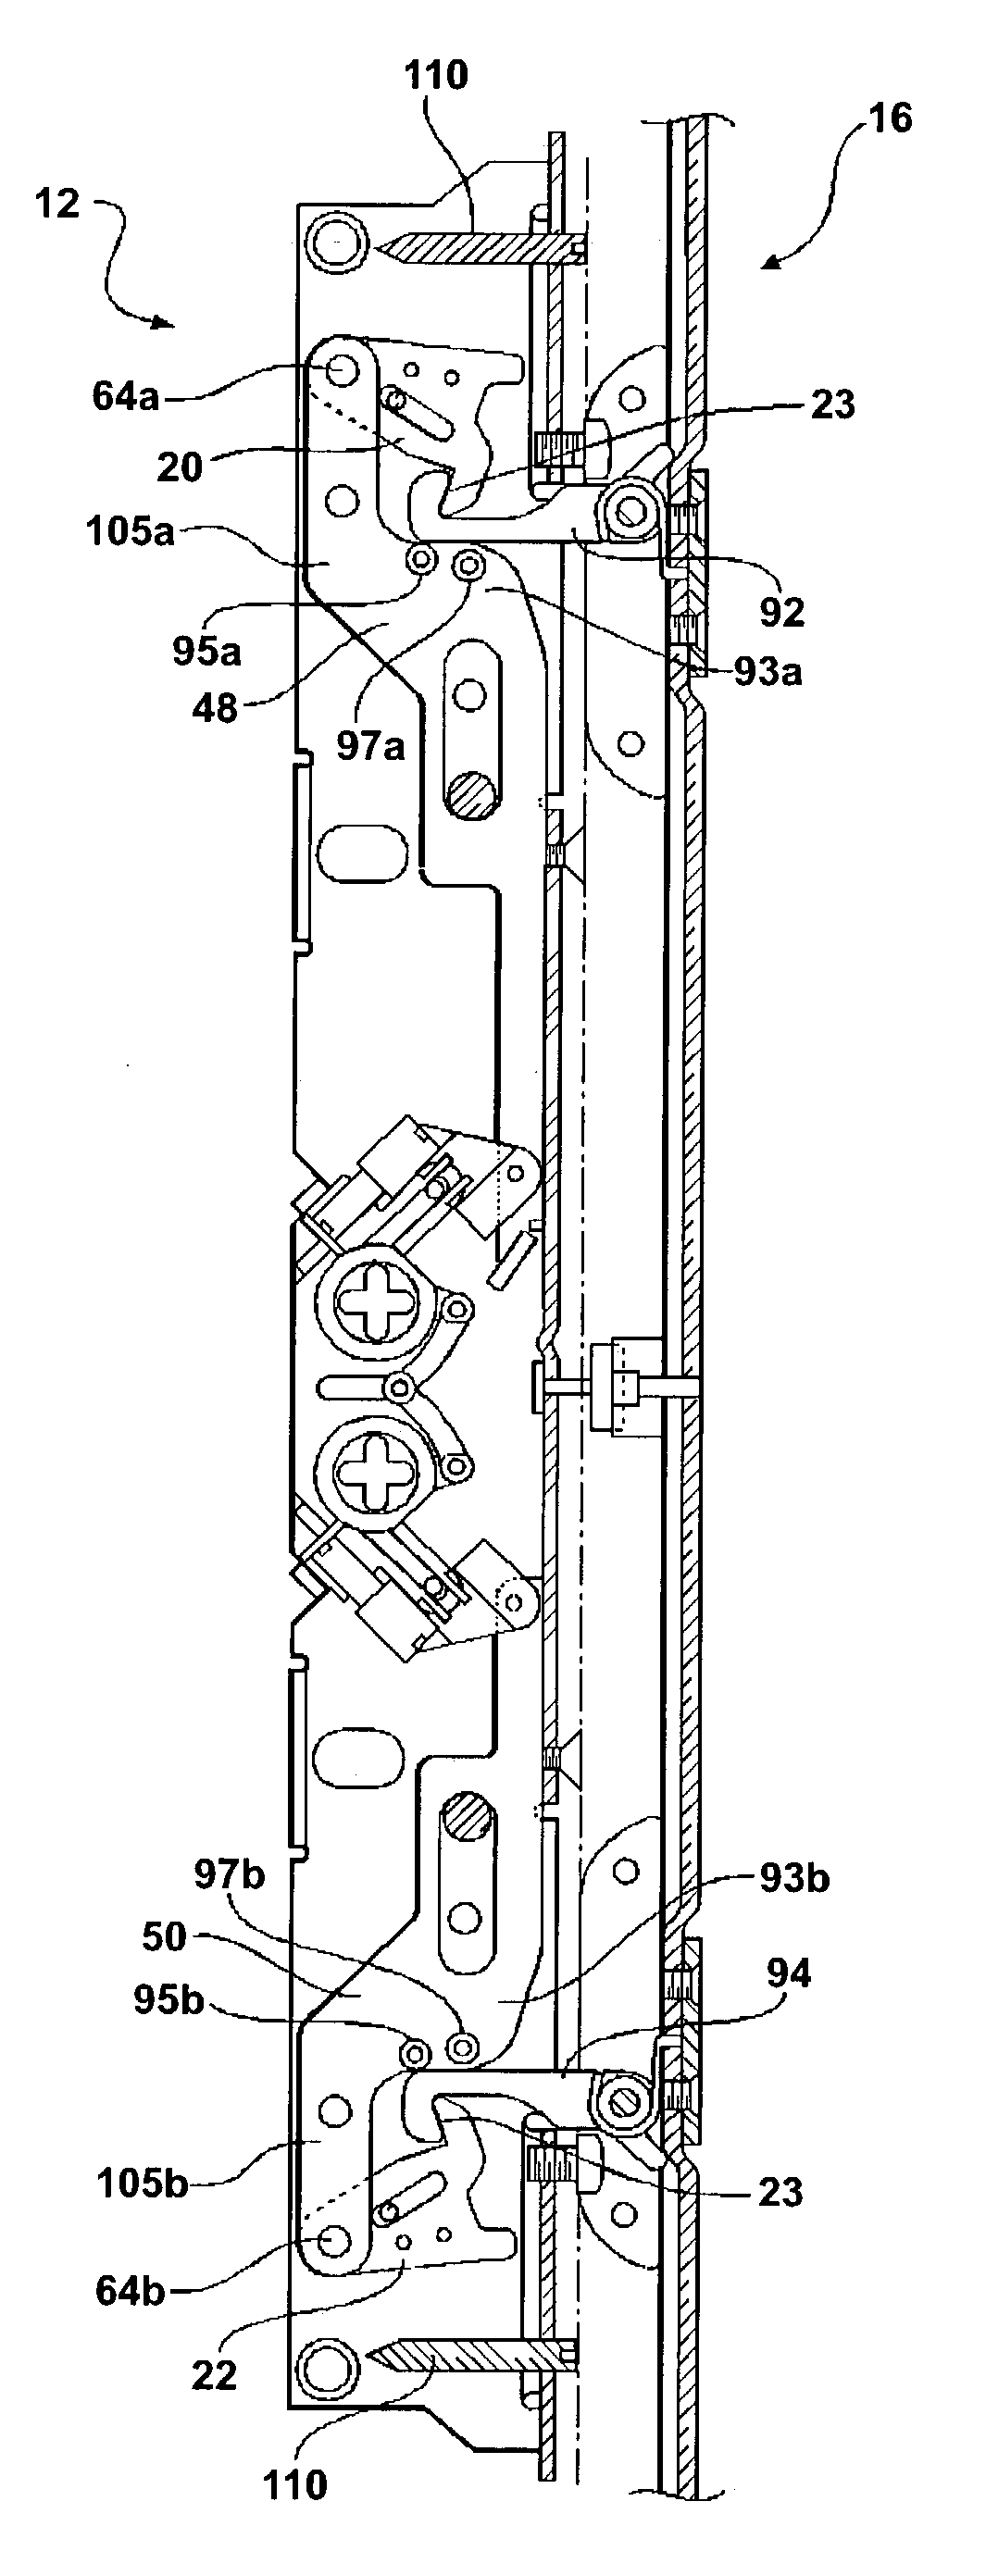 Multi-point lock assembly